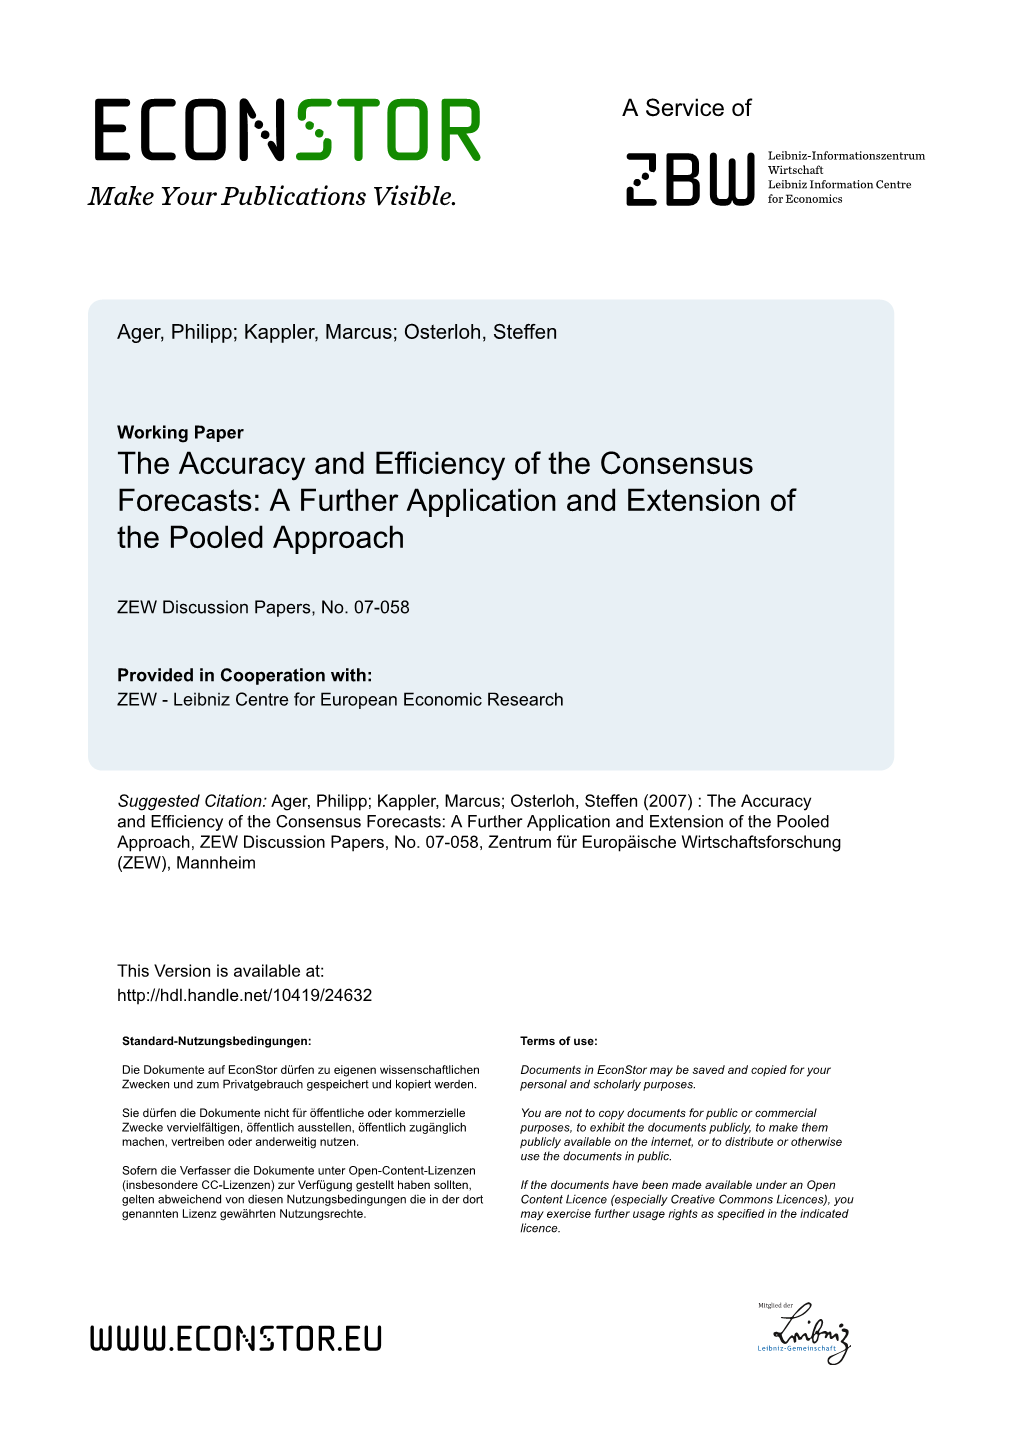 The Accuracy and Efficiency of the Consensus Forecasts: a Further Application and Extension of the Pooled Approach